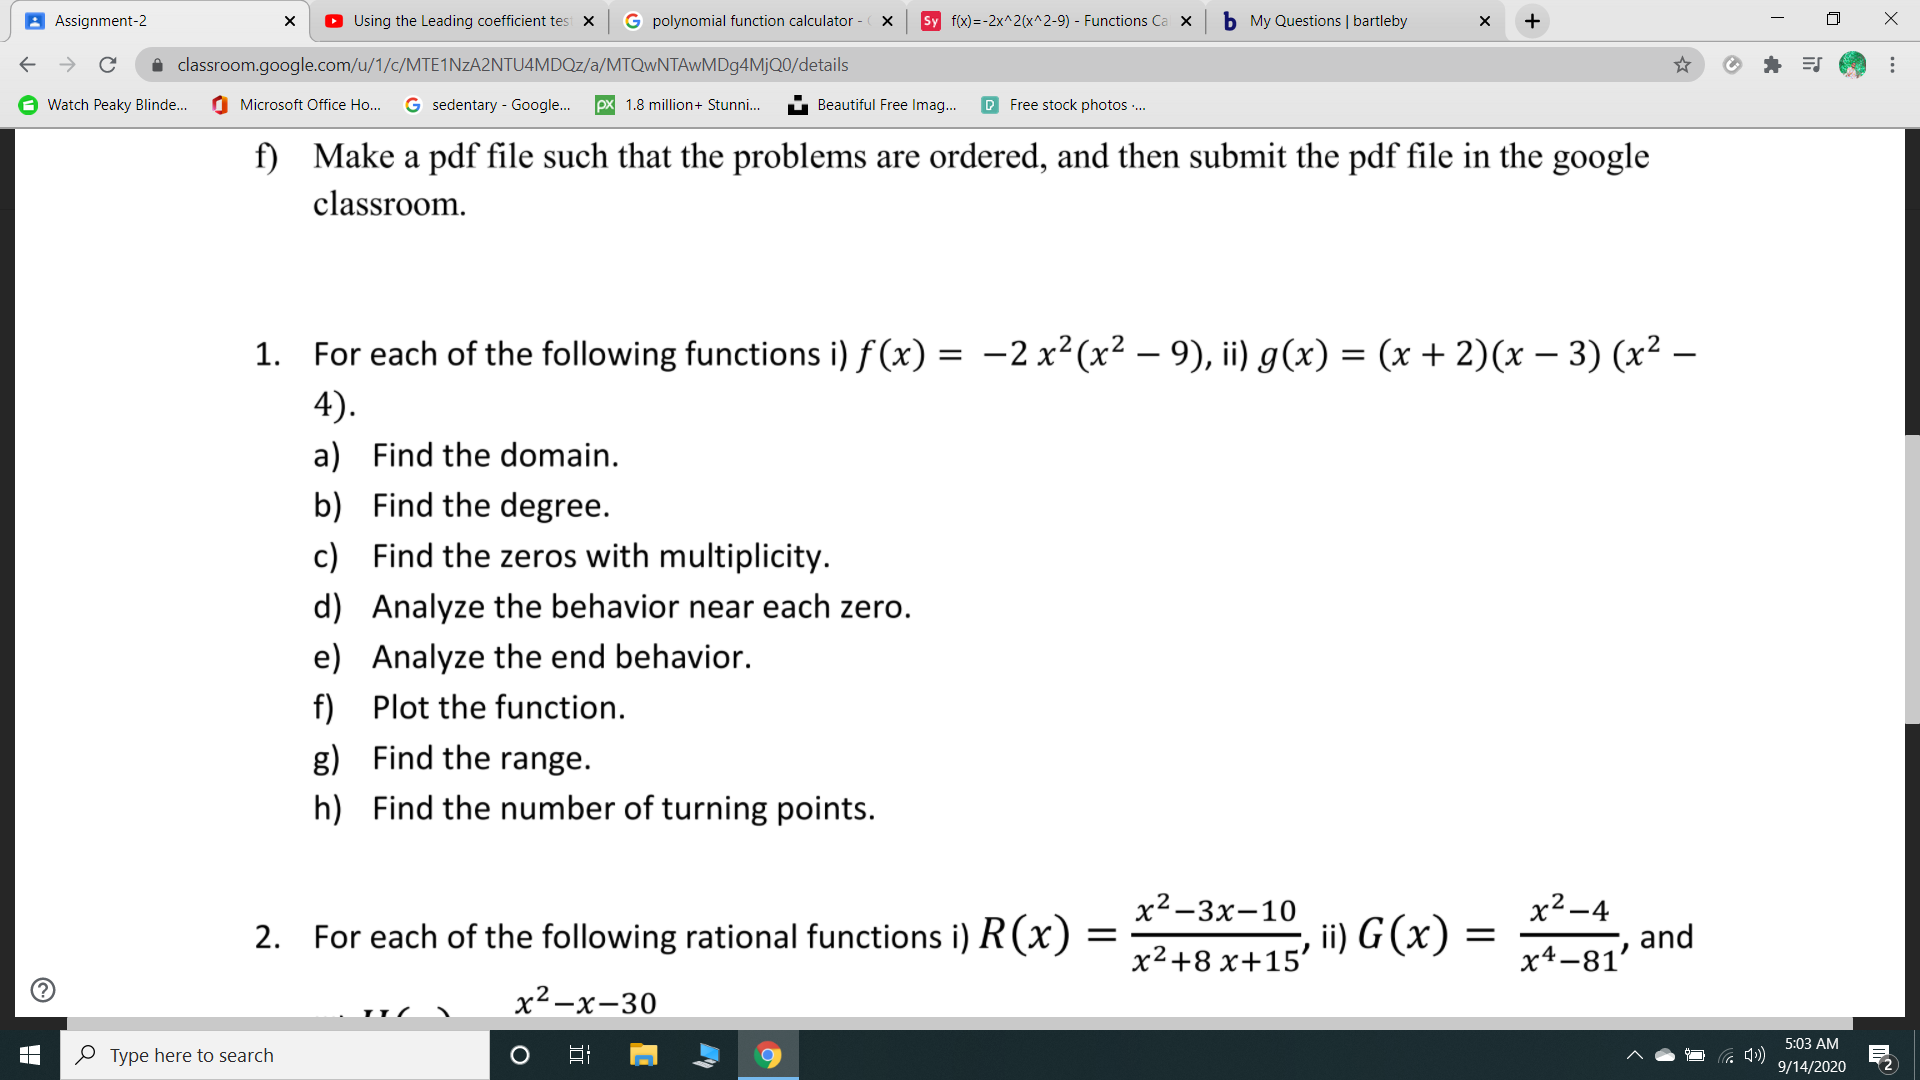 h) Find the number of turning points.
